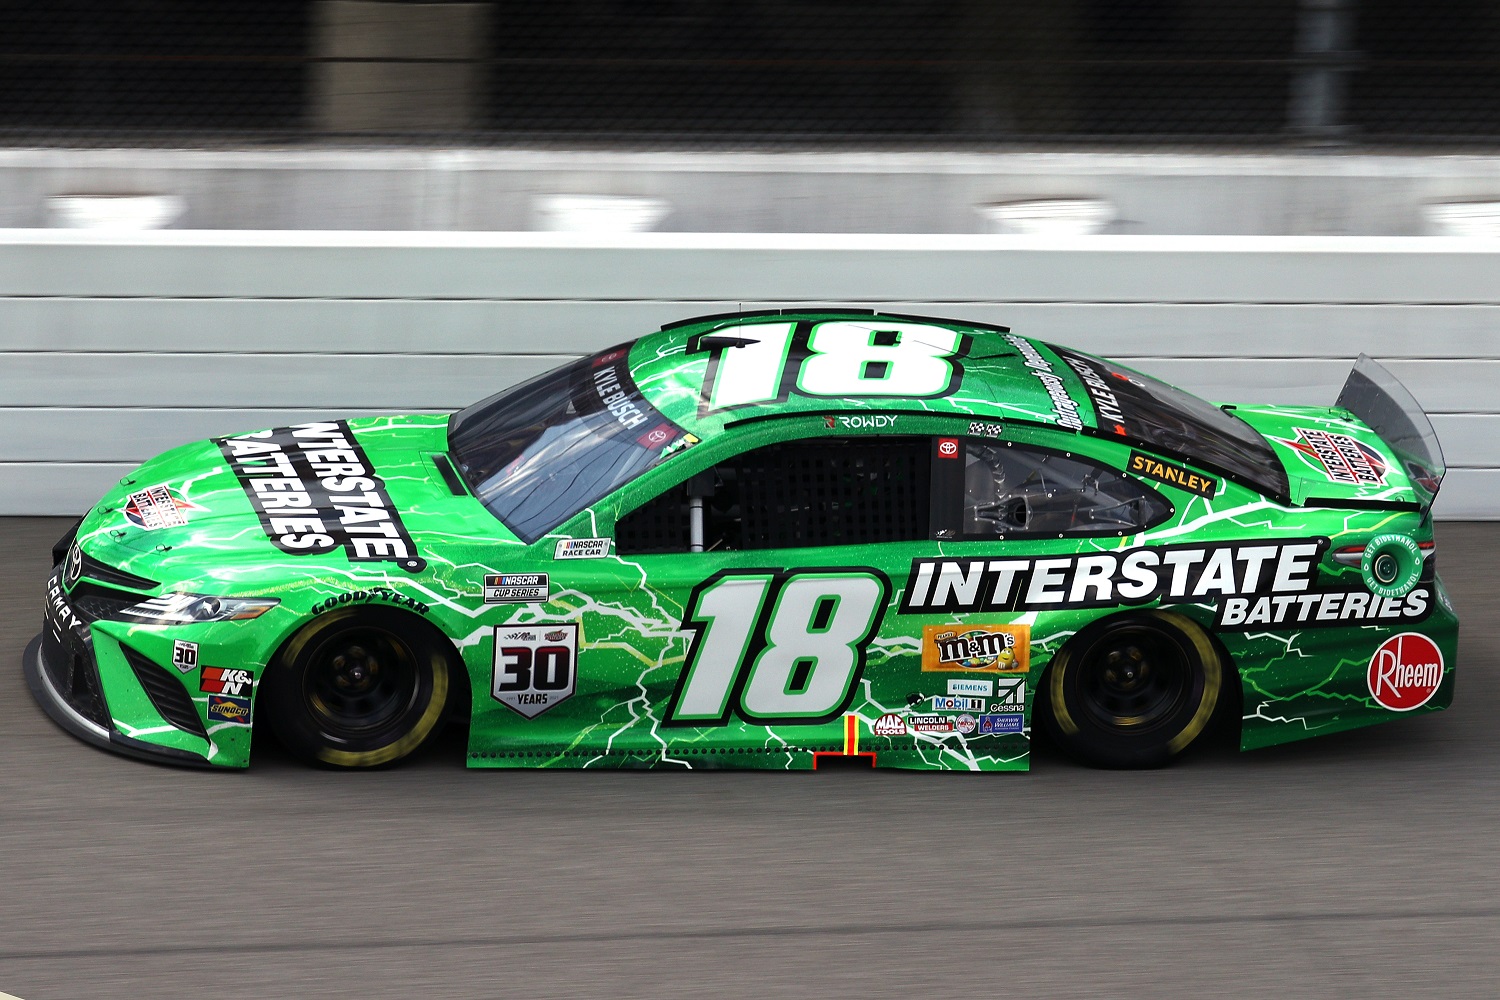 Kyle Busch, driver of the No. 18 Interstate Batteries Toyota, competes at the NASCAR Cup Series FireKeepers Casino 400 at Michigan International Speedway on Aug. 22, 2021. Sean Gardner/Getty Images